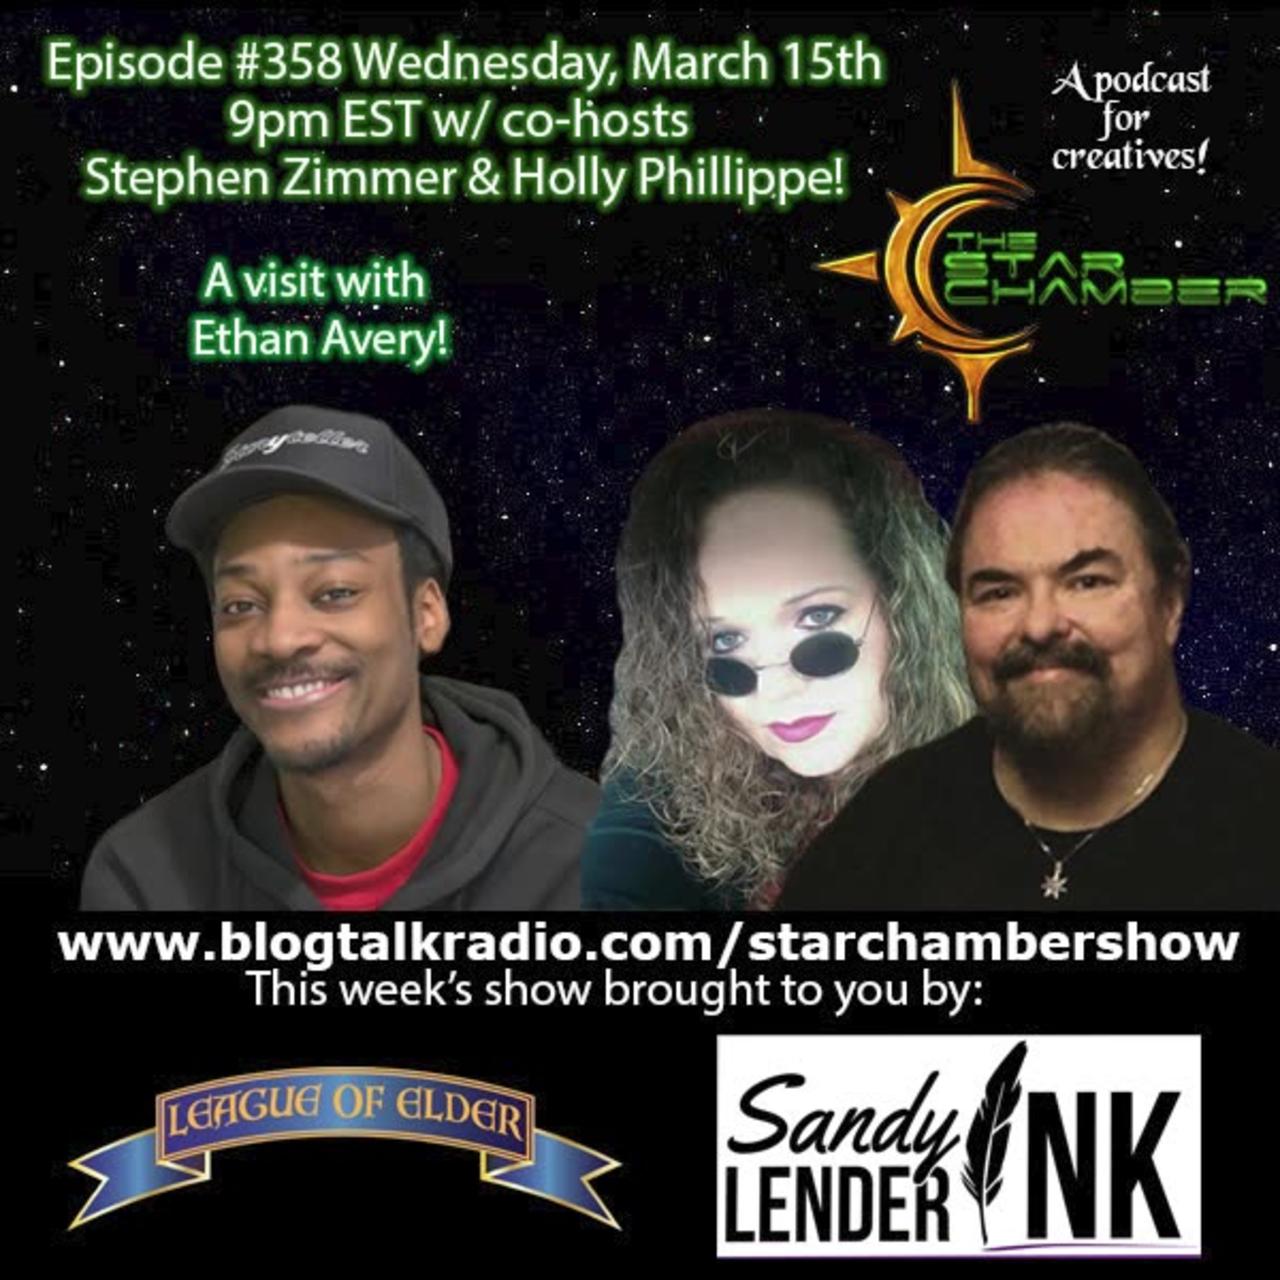 The Star Chamber Show Live Podcast - Episode 358 - Featuring Ethan Avery